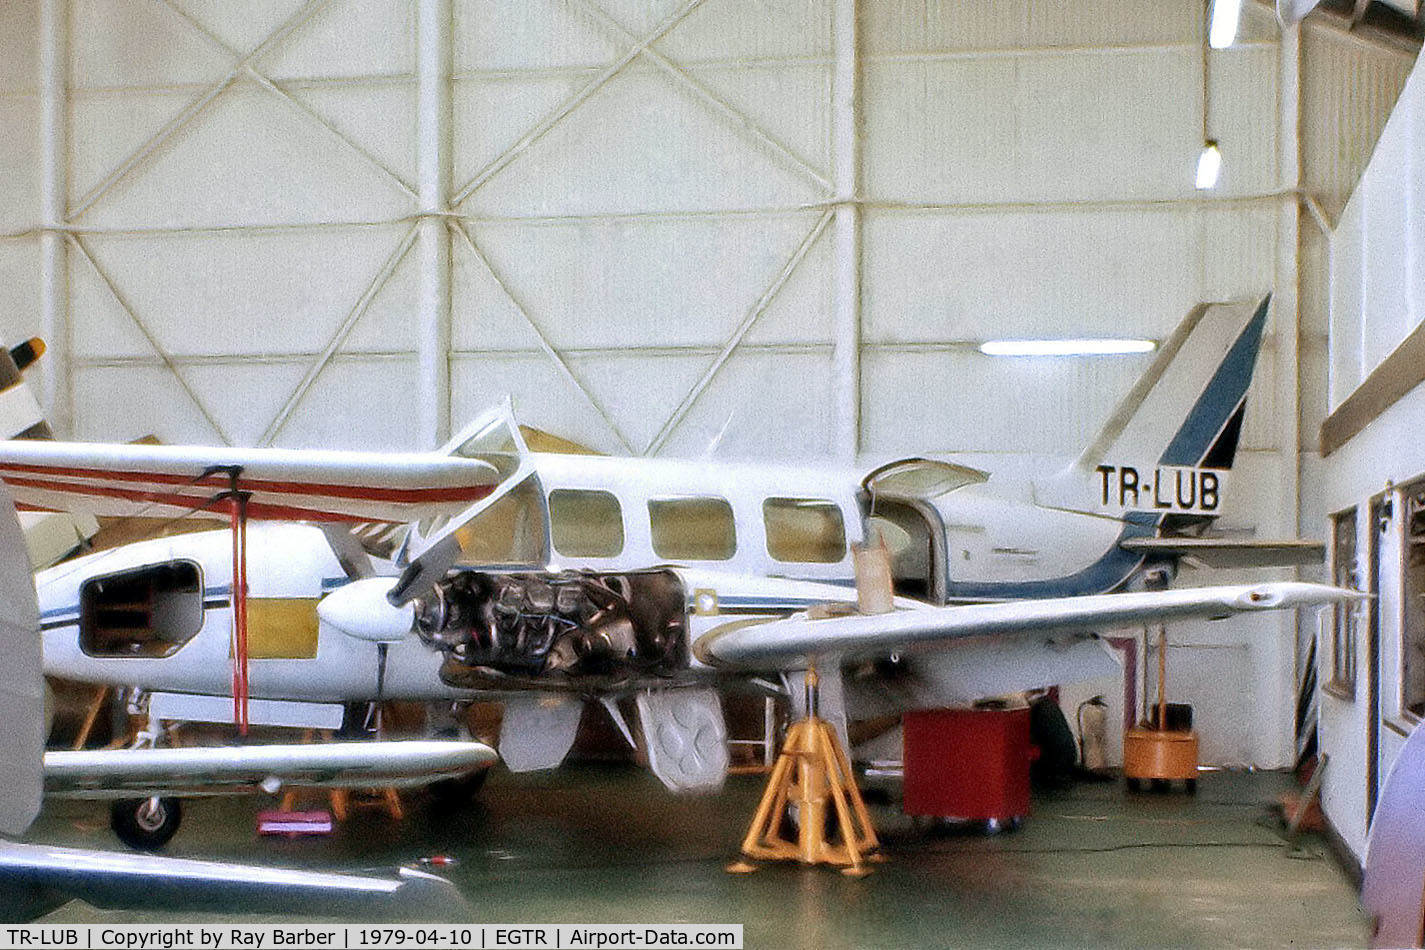 TR-LUB, 1975 Piper PA-31-350 Chieftain C/N 31-7552035, TR-LUB   Piper PA-31-350 Navajo Chieftain [31-7552035] Elstree 10/04/1979. From a slide. Being overhauled prior to becoming G-BGFY.